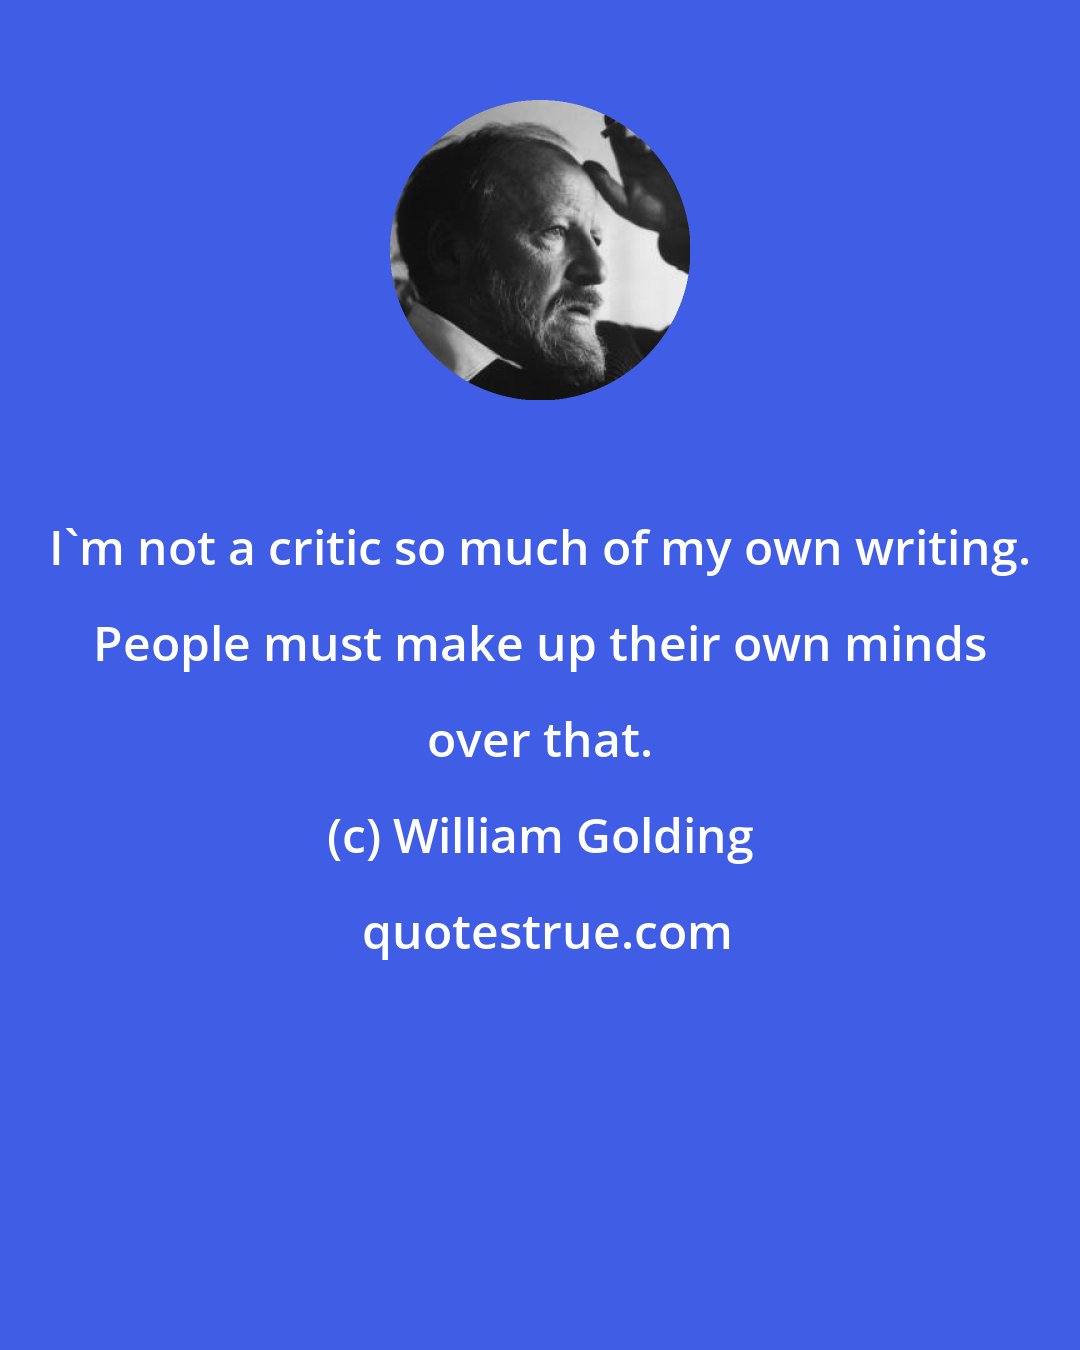 William Golding: I'm not a critic so much of my own writing. People must make up their own minds over that.